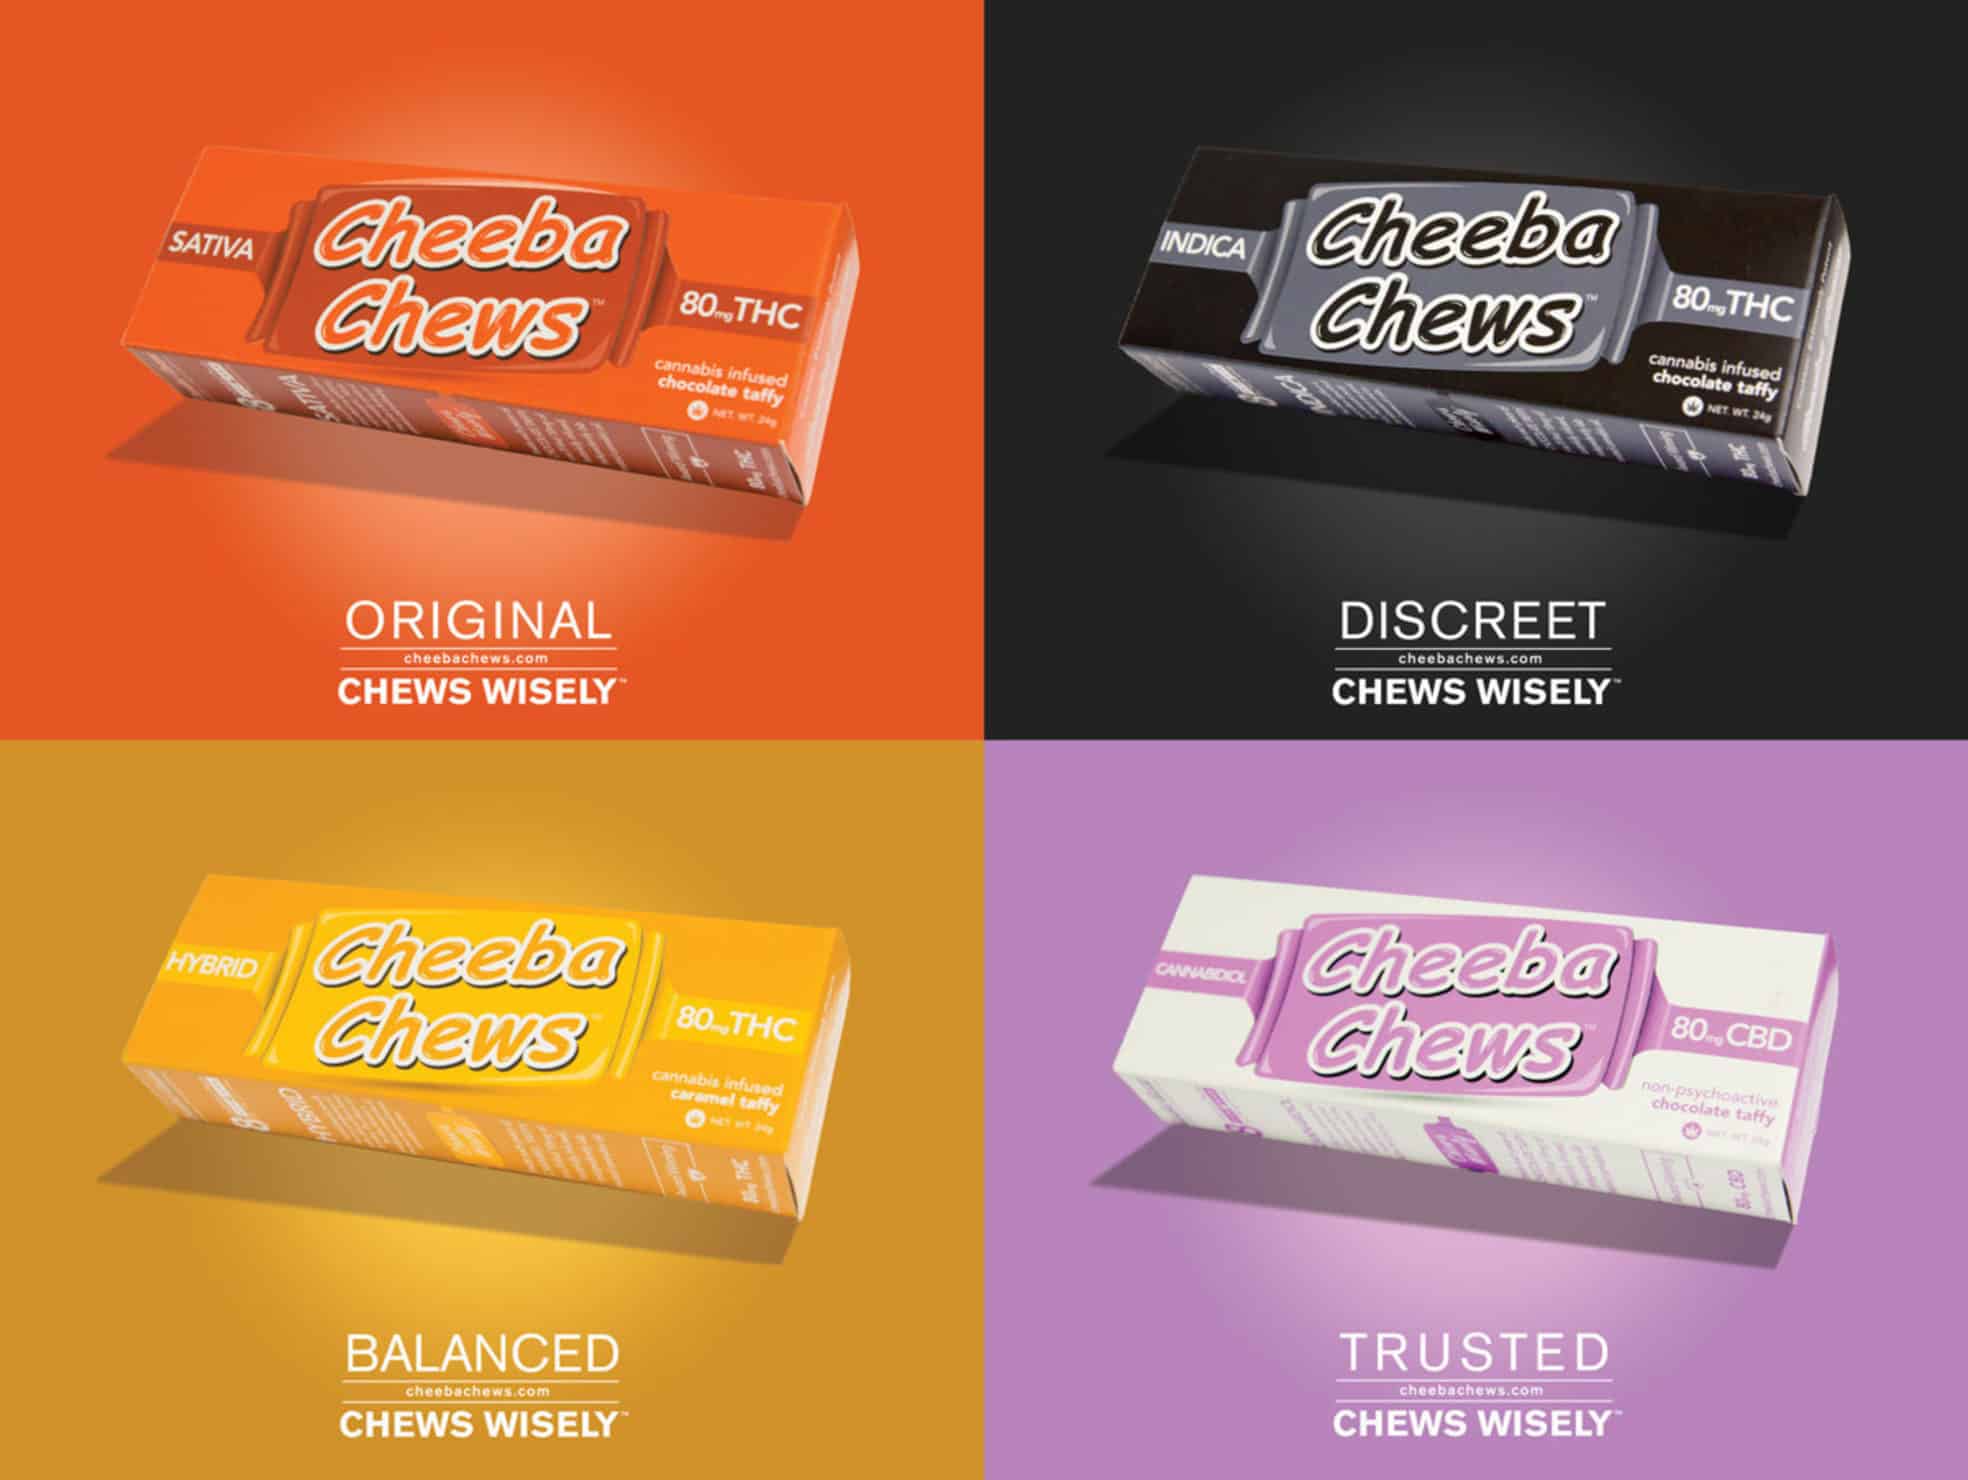 Cheeba Chews Product Overview. Four cheese chews flavors.